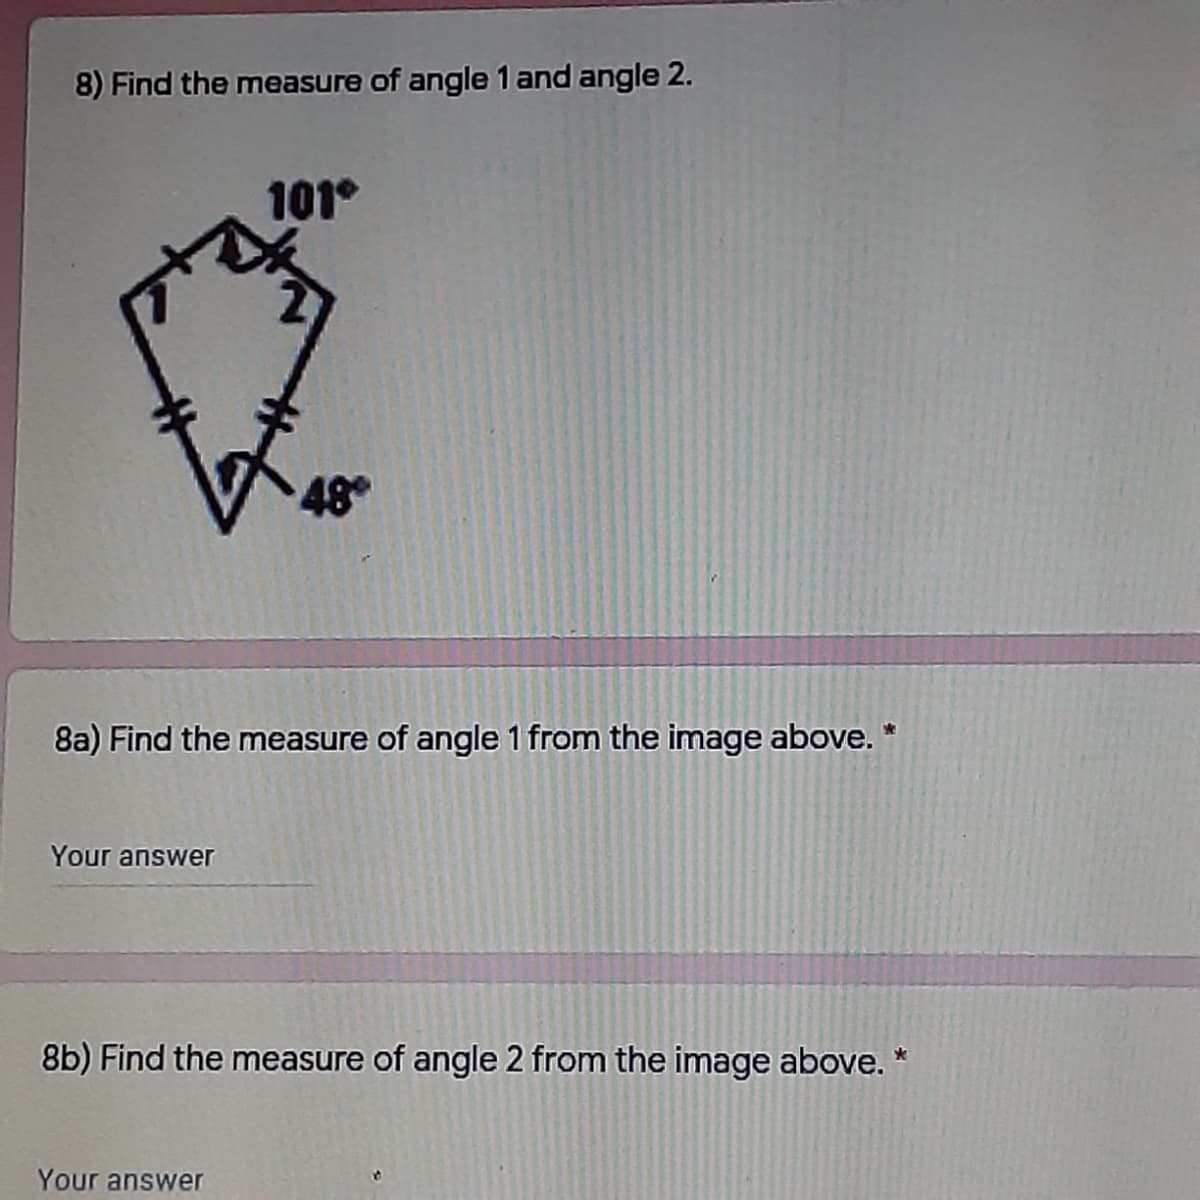 8) Find the measure of angle 1 and angle 2.
101°
48
8a) Find the measure of angle 1 from the image above. *
Your answer
8b) Find the measure of angle 2 from the image above. *
Your answer
